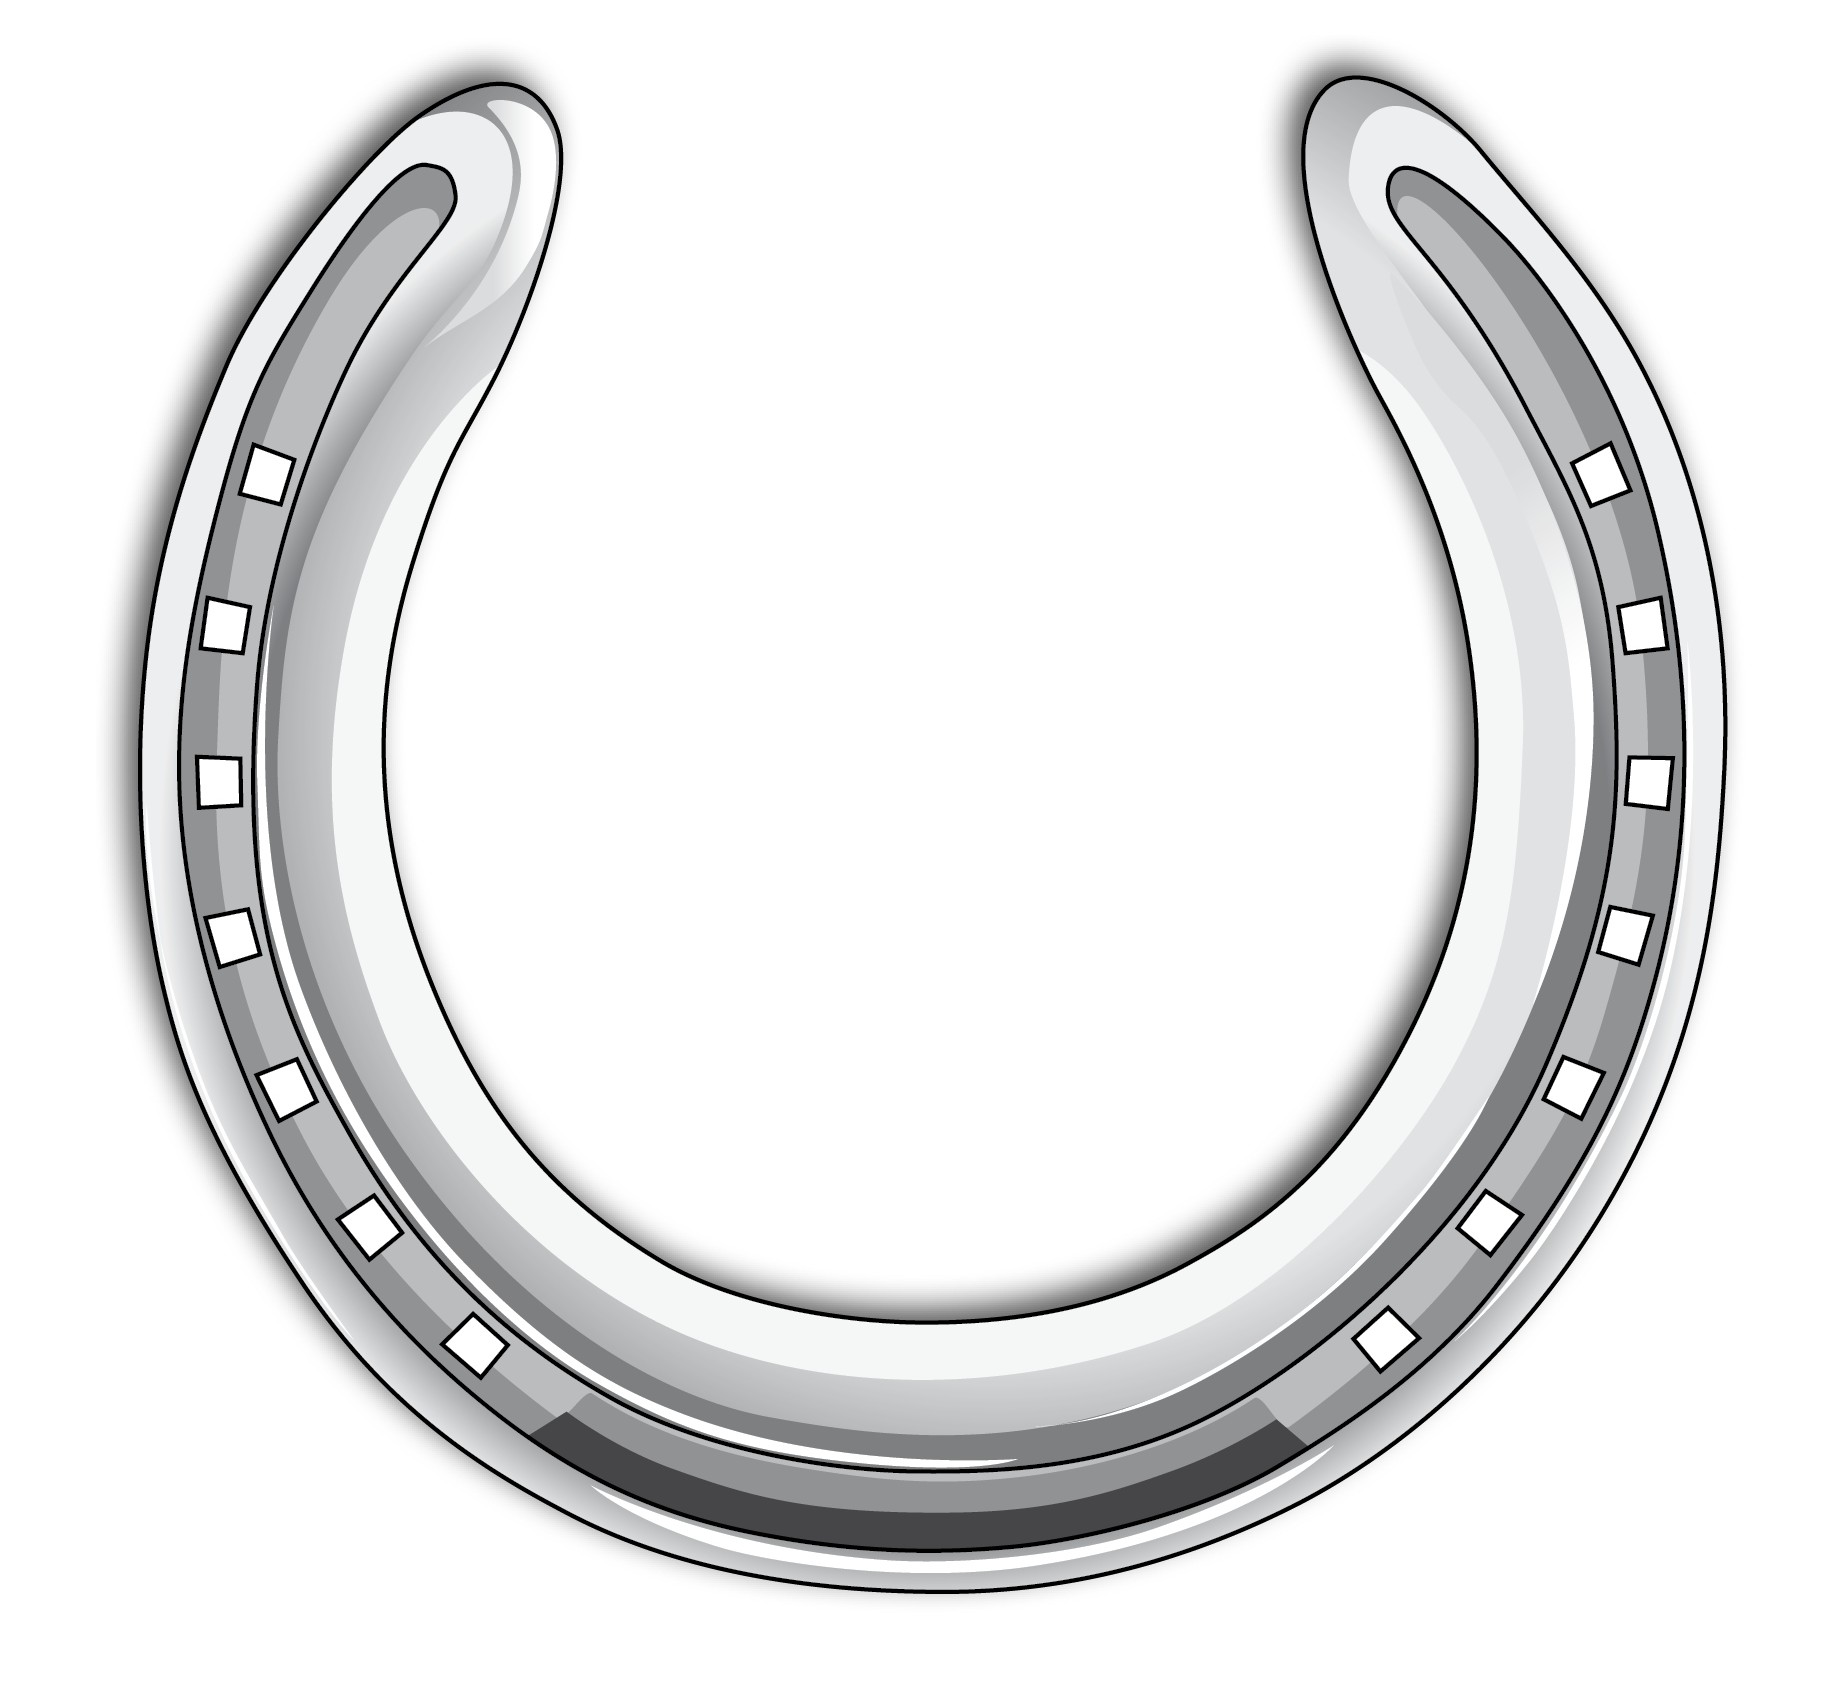 Horse Shoes Related Keywords & Suggestions - Horse Shoes Long Tail ...